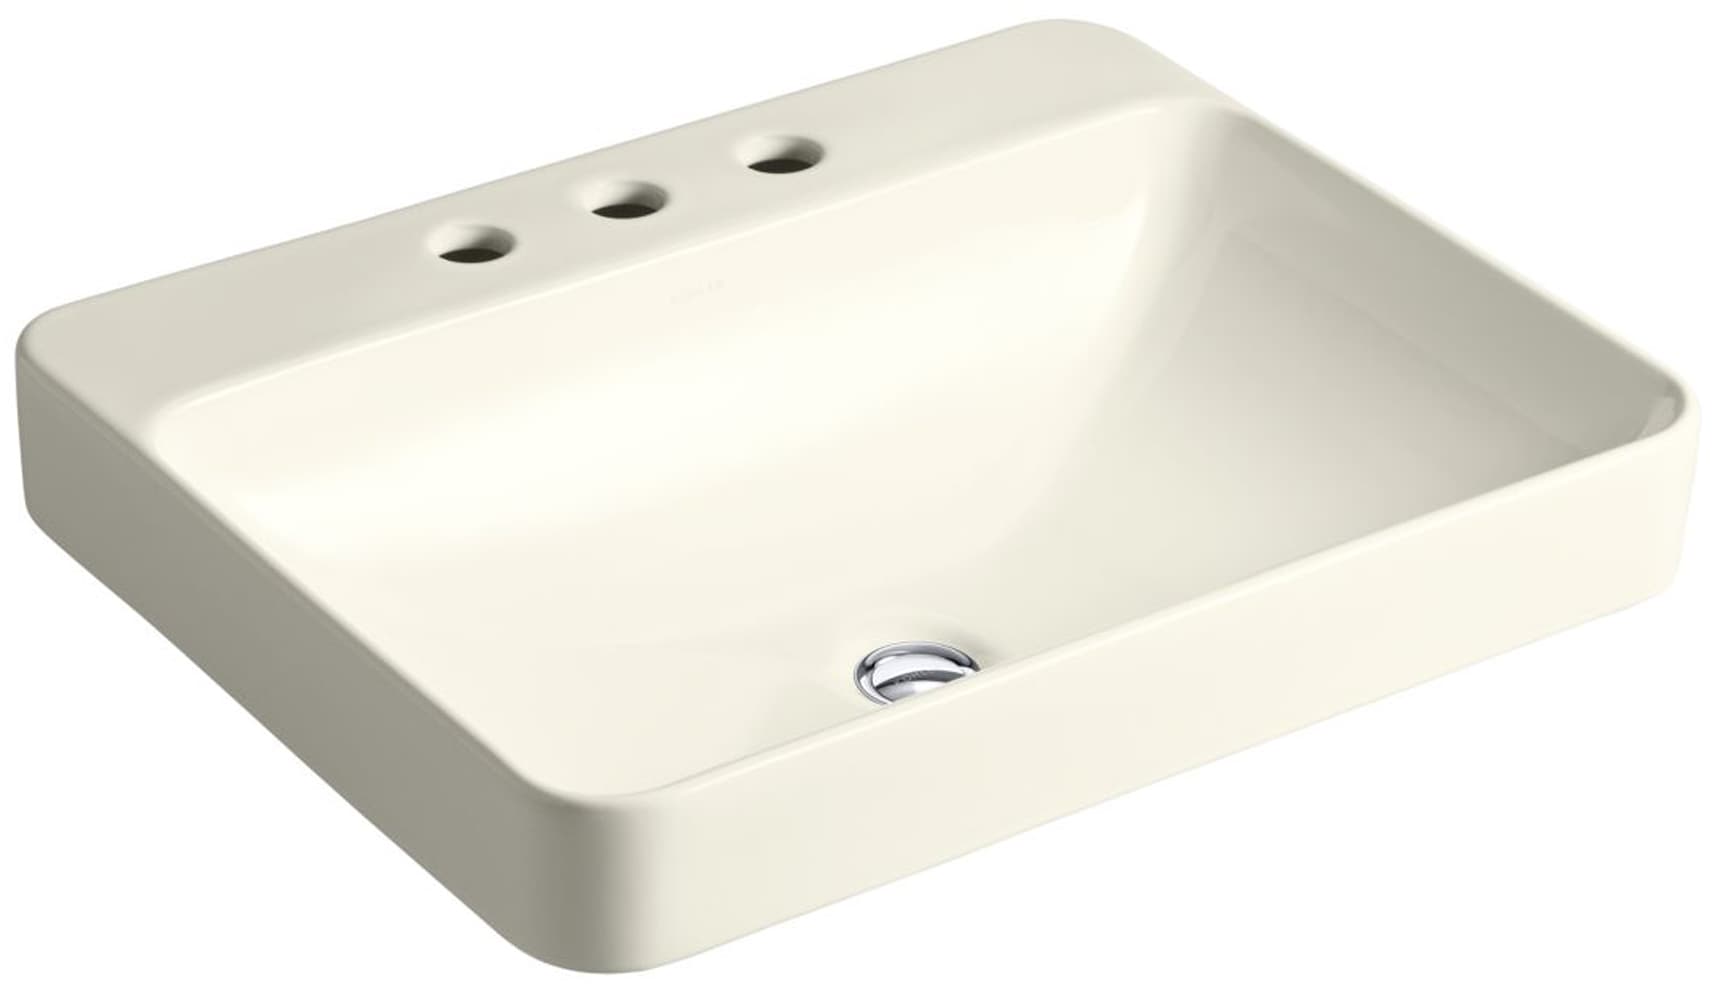 Vox Collection K-2660-8-96 23"" x 18.13"" x 6.88"" Vessel Bathroom Sink with 8"" Widespread Three Faucet Holes and Overflow Drain in -  Kohler, K2660896